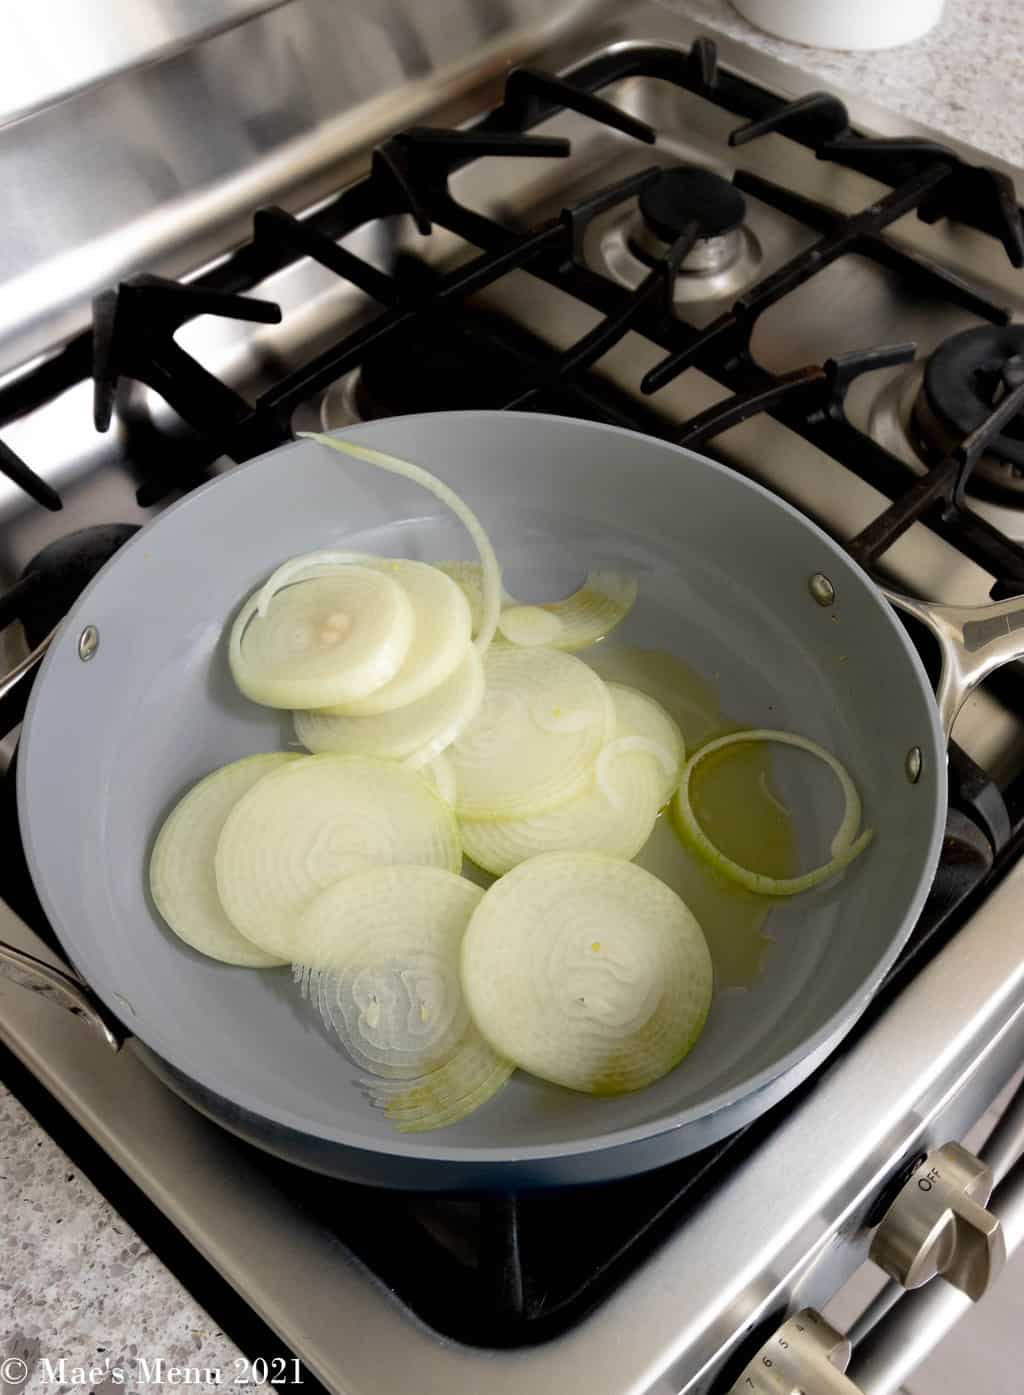 Onions and olive oil in a pan on the gas range.